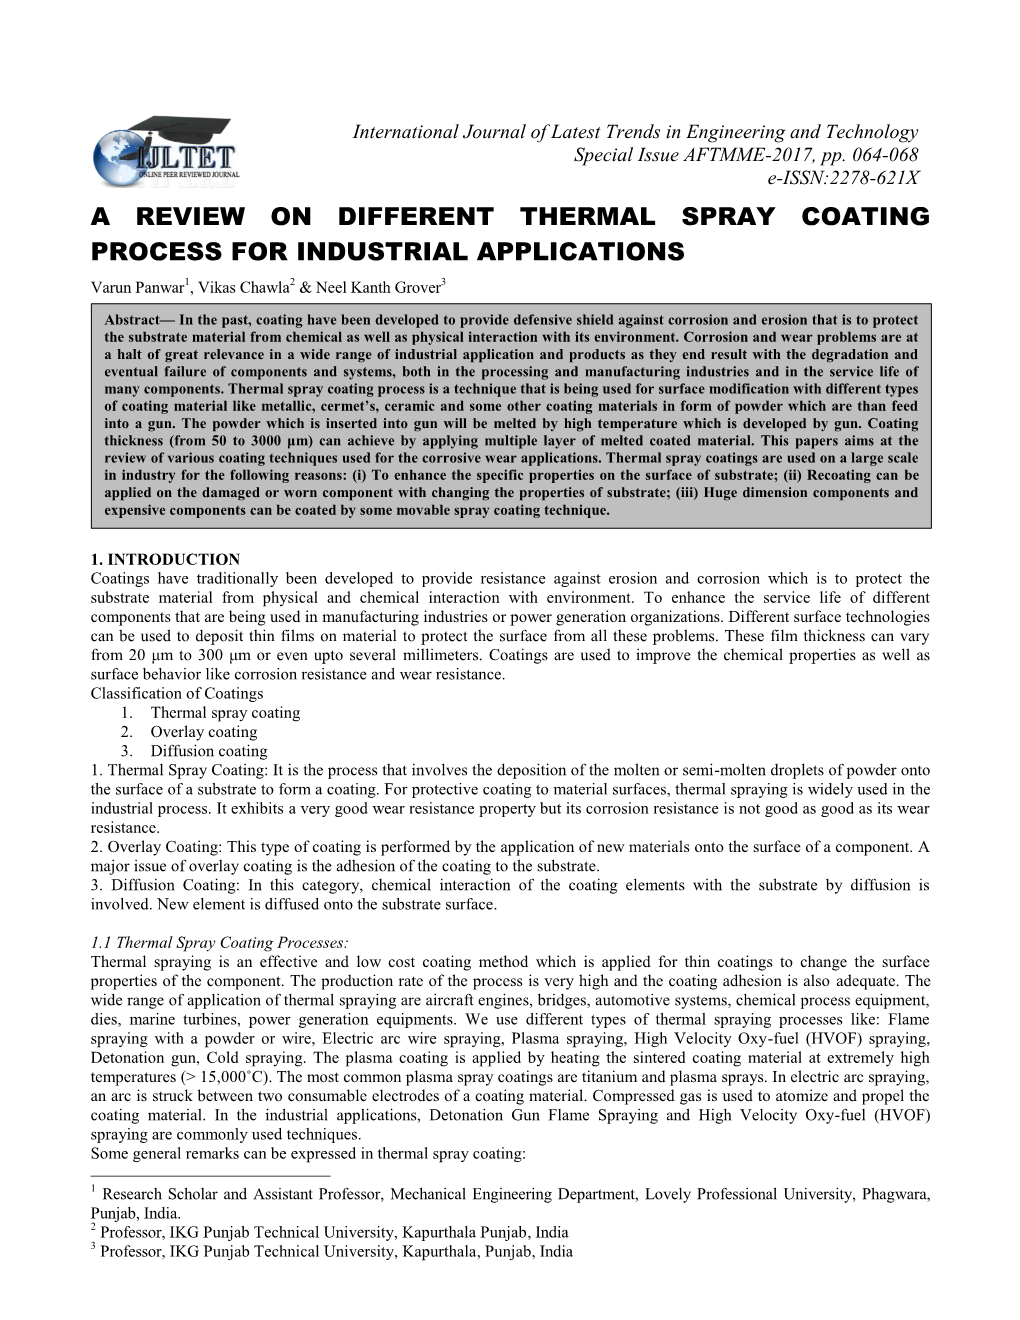 A Review on Different Thermal Spray Coating Process for Industrial Applications